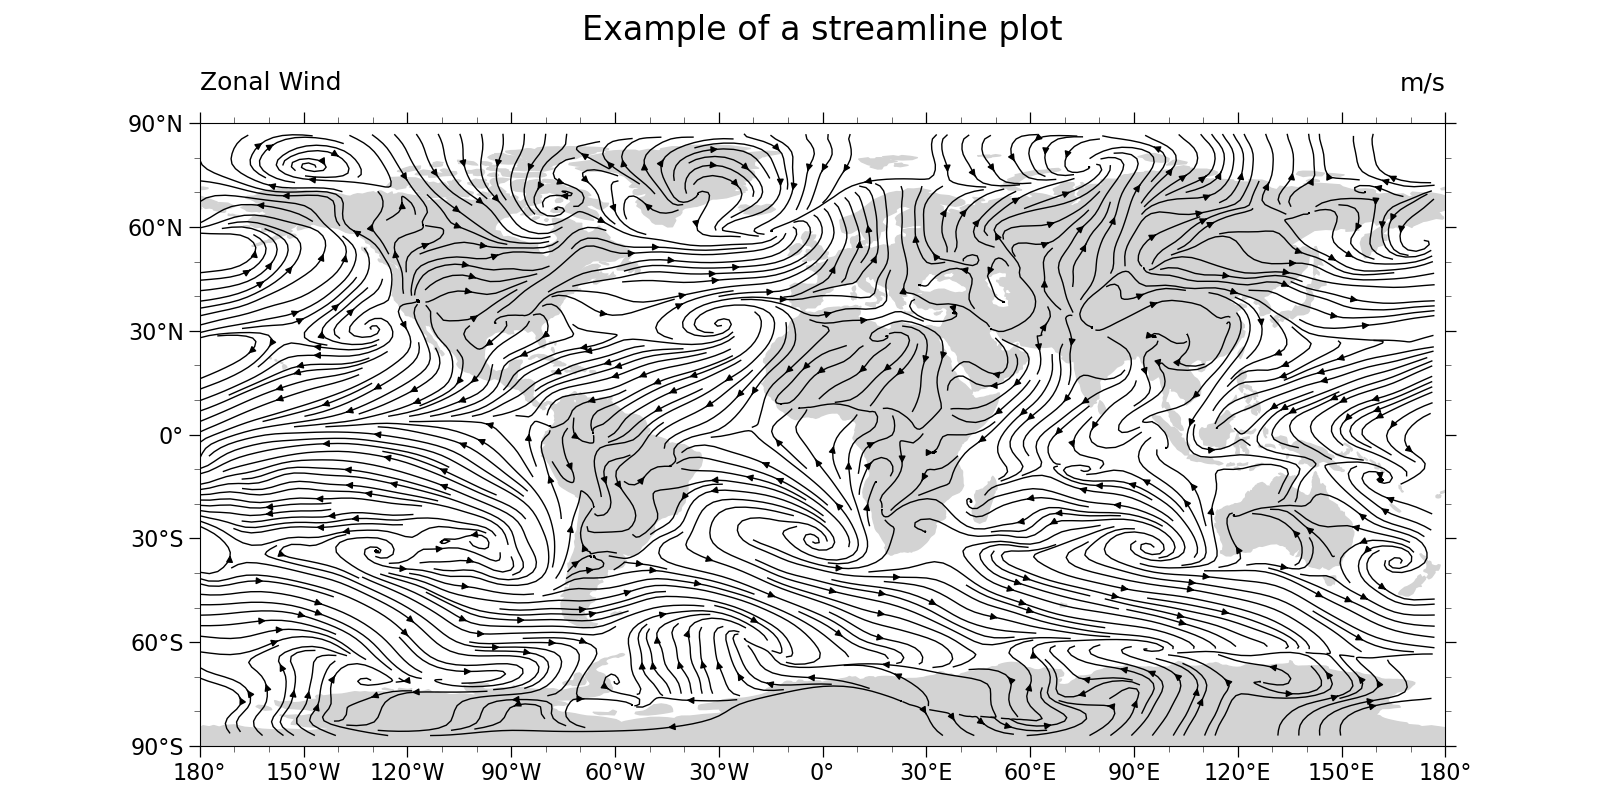 Zonal Wind, Example of a streamline plot, m/s